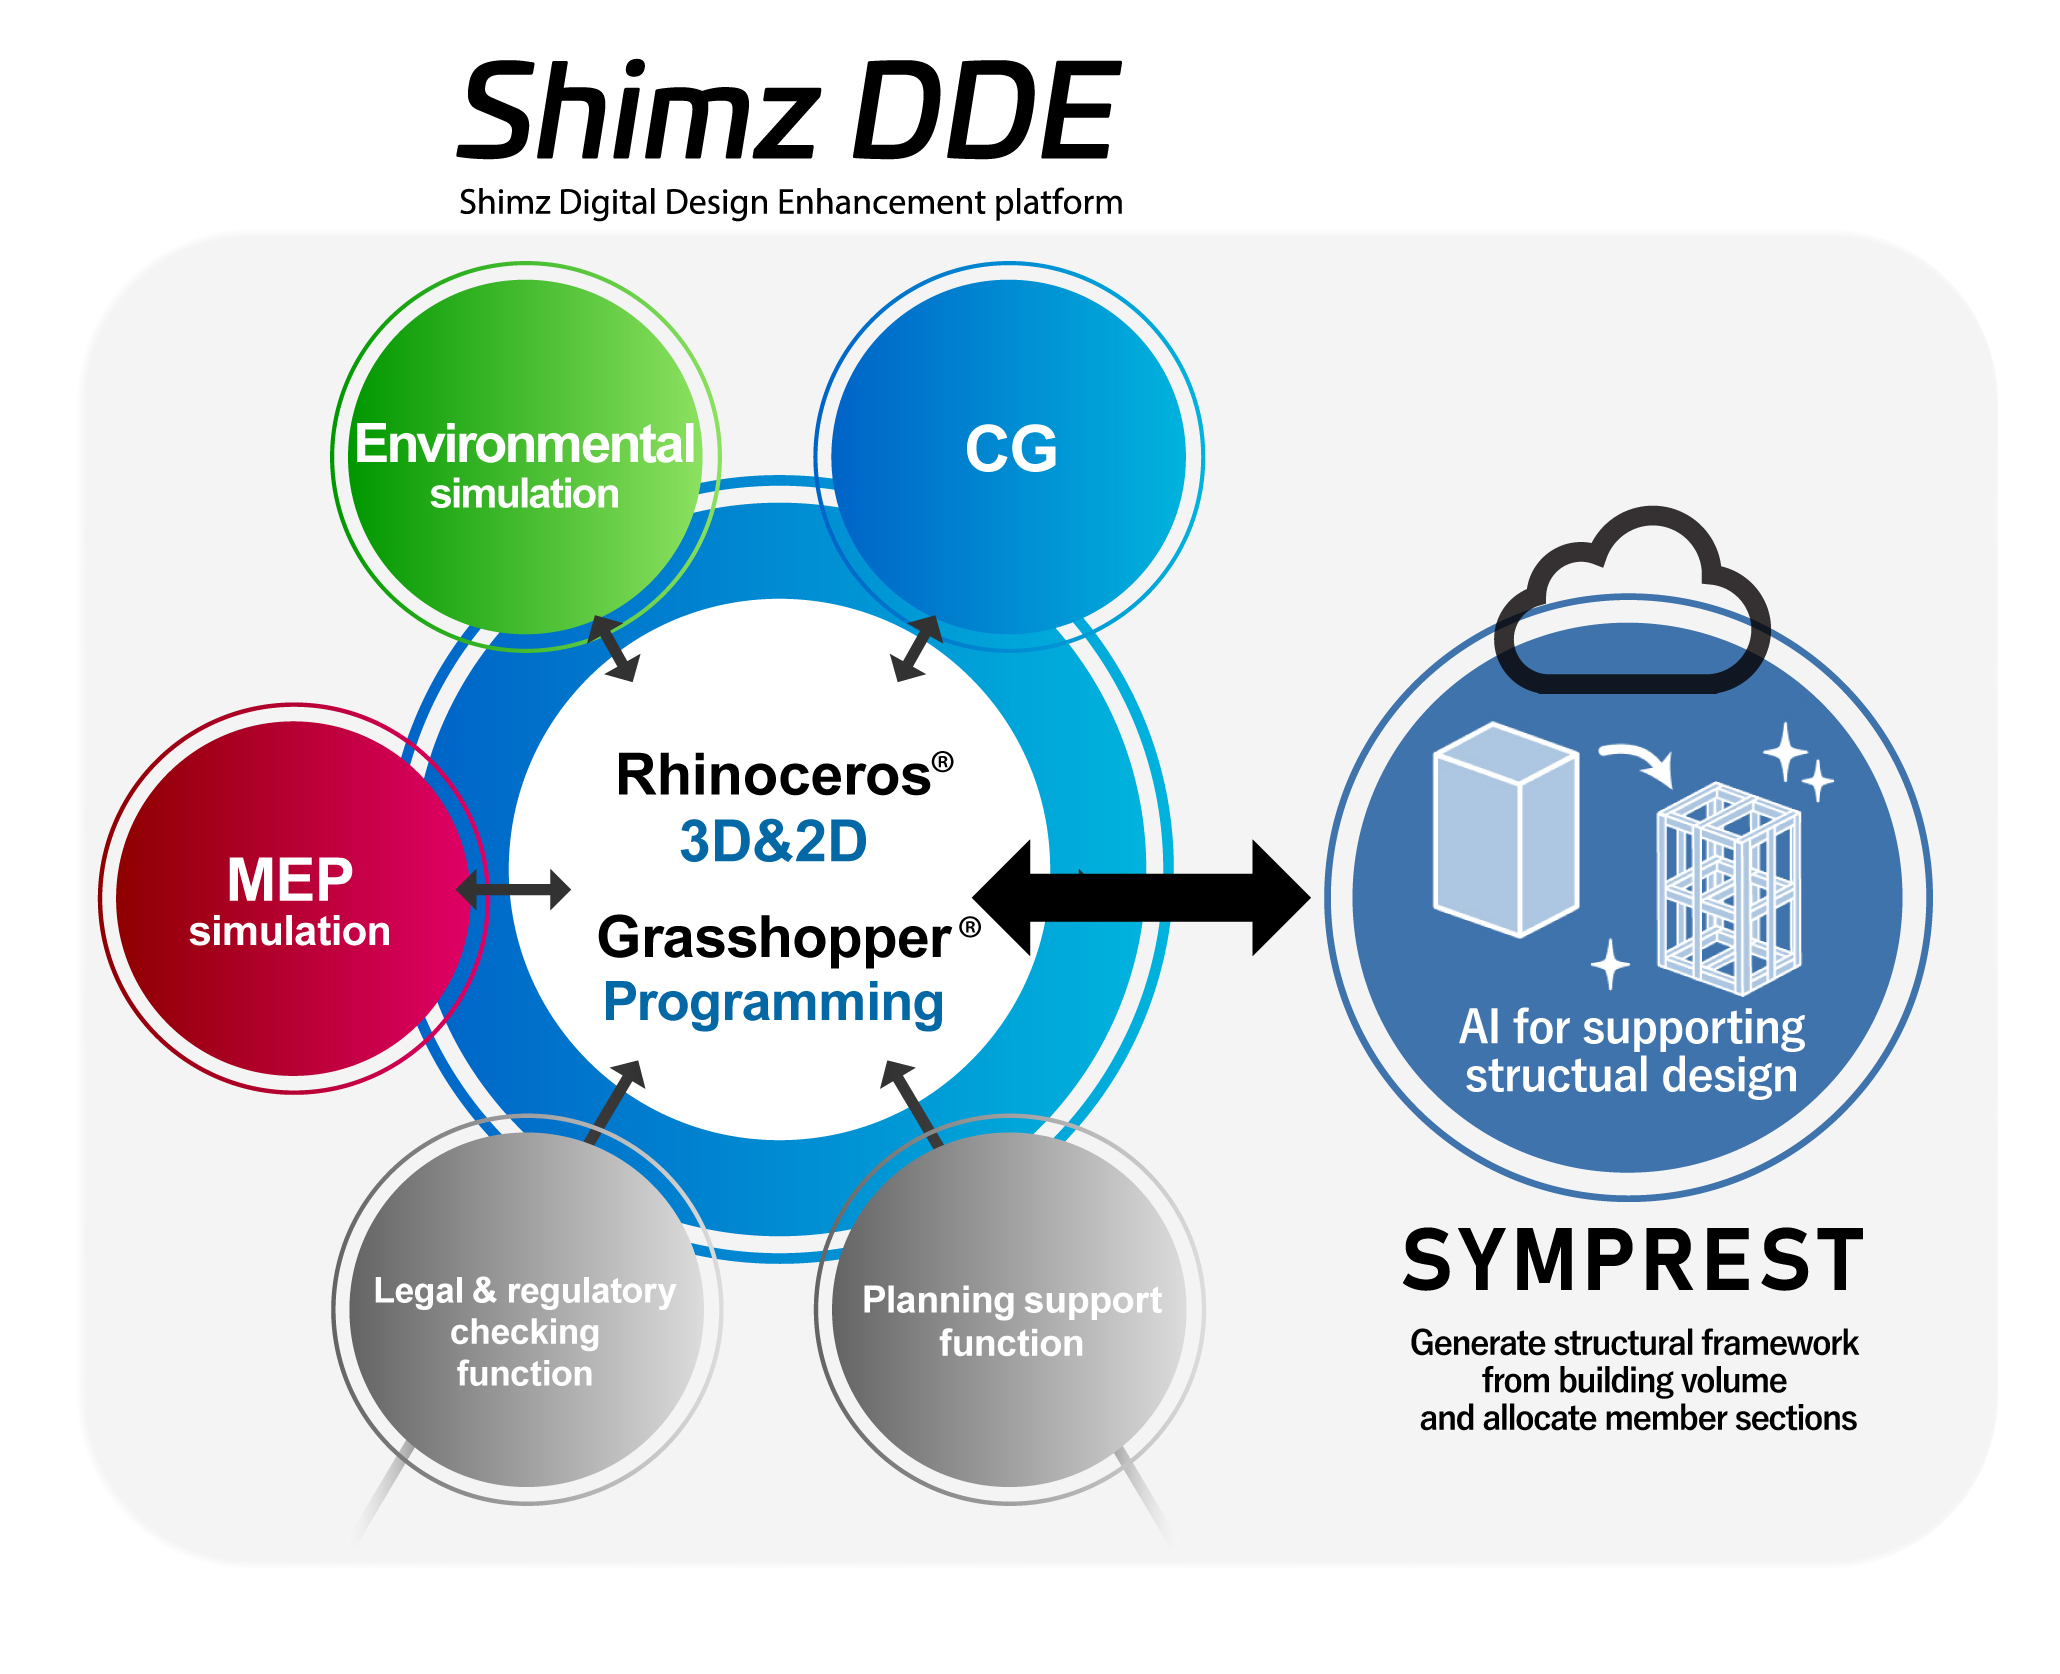 Shimz DDE's tool, the structural design support AI 'SYMPREST', was featured in three newspapers.